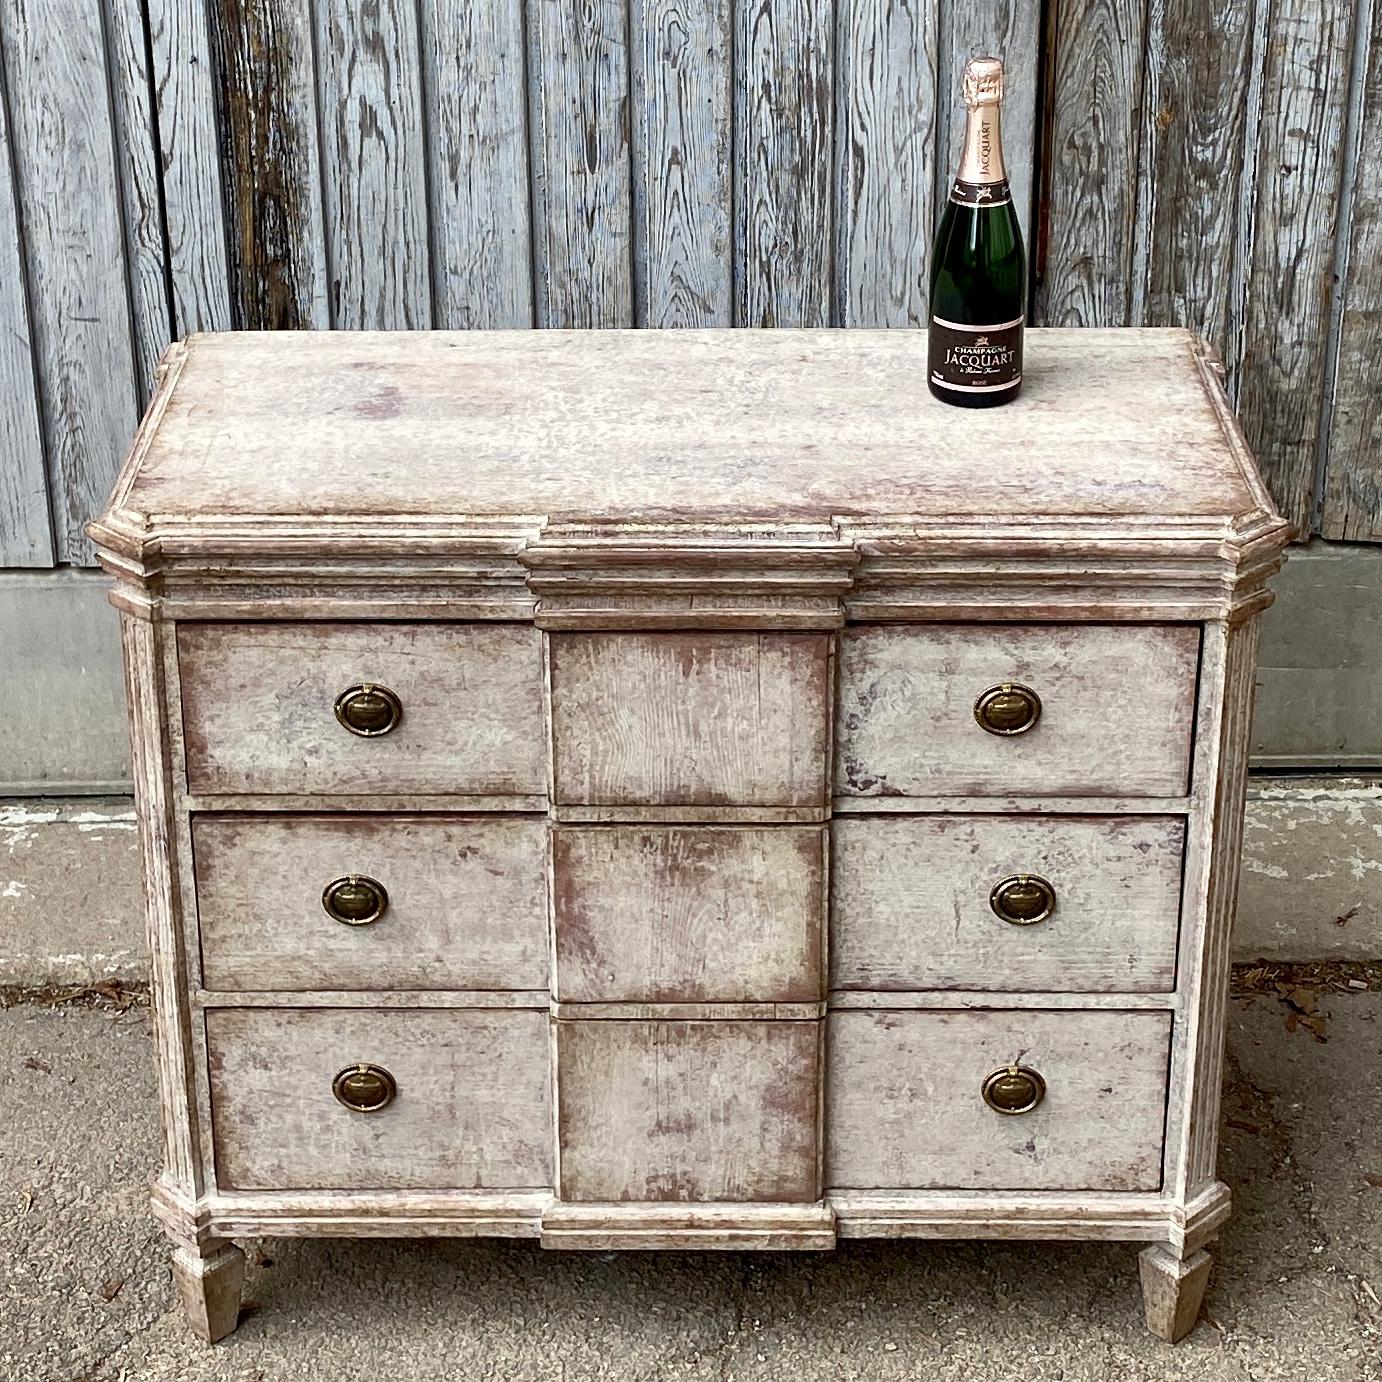 Late Swedish 19th century painted chest of drawers. This 3 drawer dresser has a charming break front style with the original brass hardware.